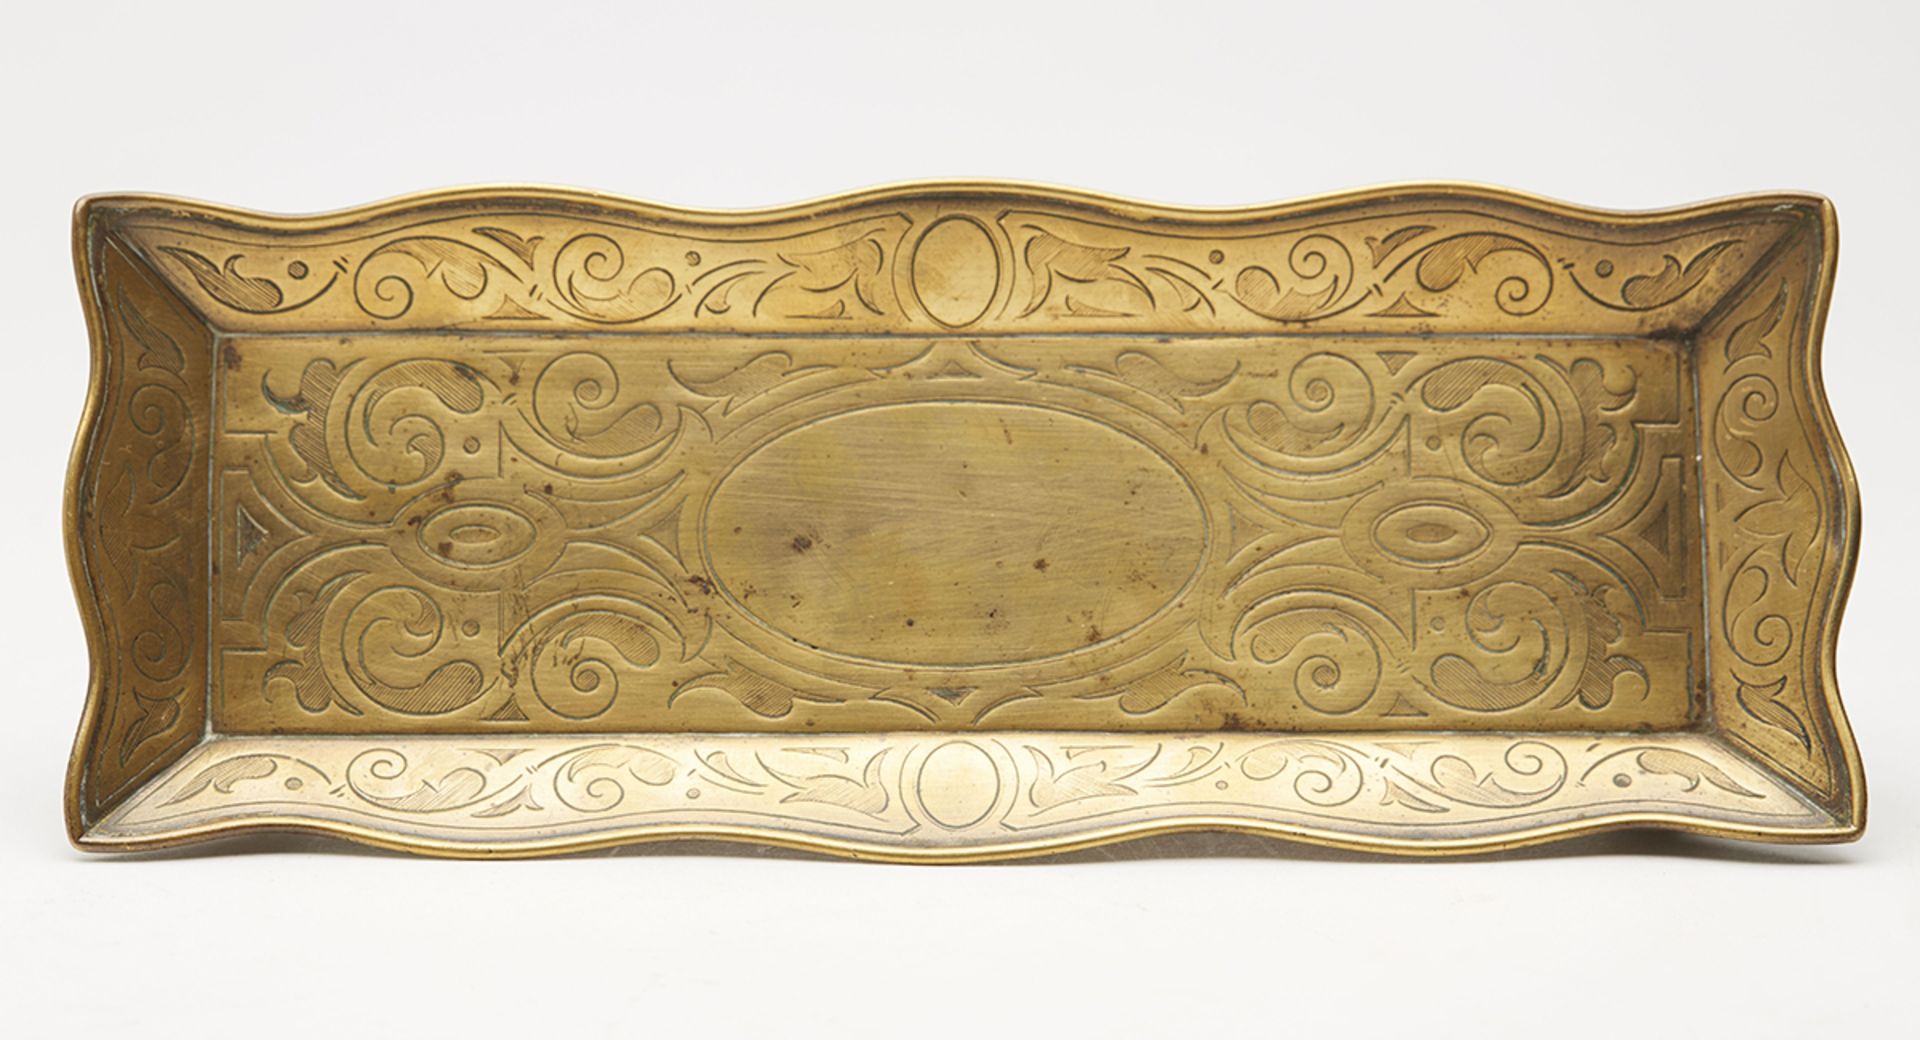 ARTS & CRAFTS ENGRAVED BRASS DESK PEN TRAY c.1890   DIMENSIONS   Length 22cm, Height 3cm   CONDITION